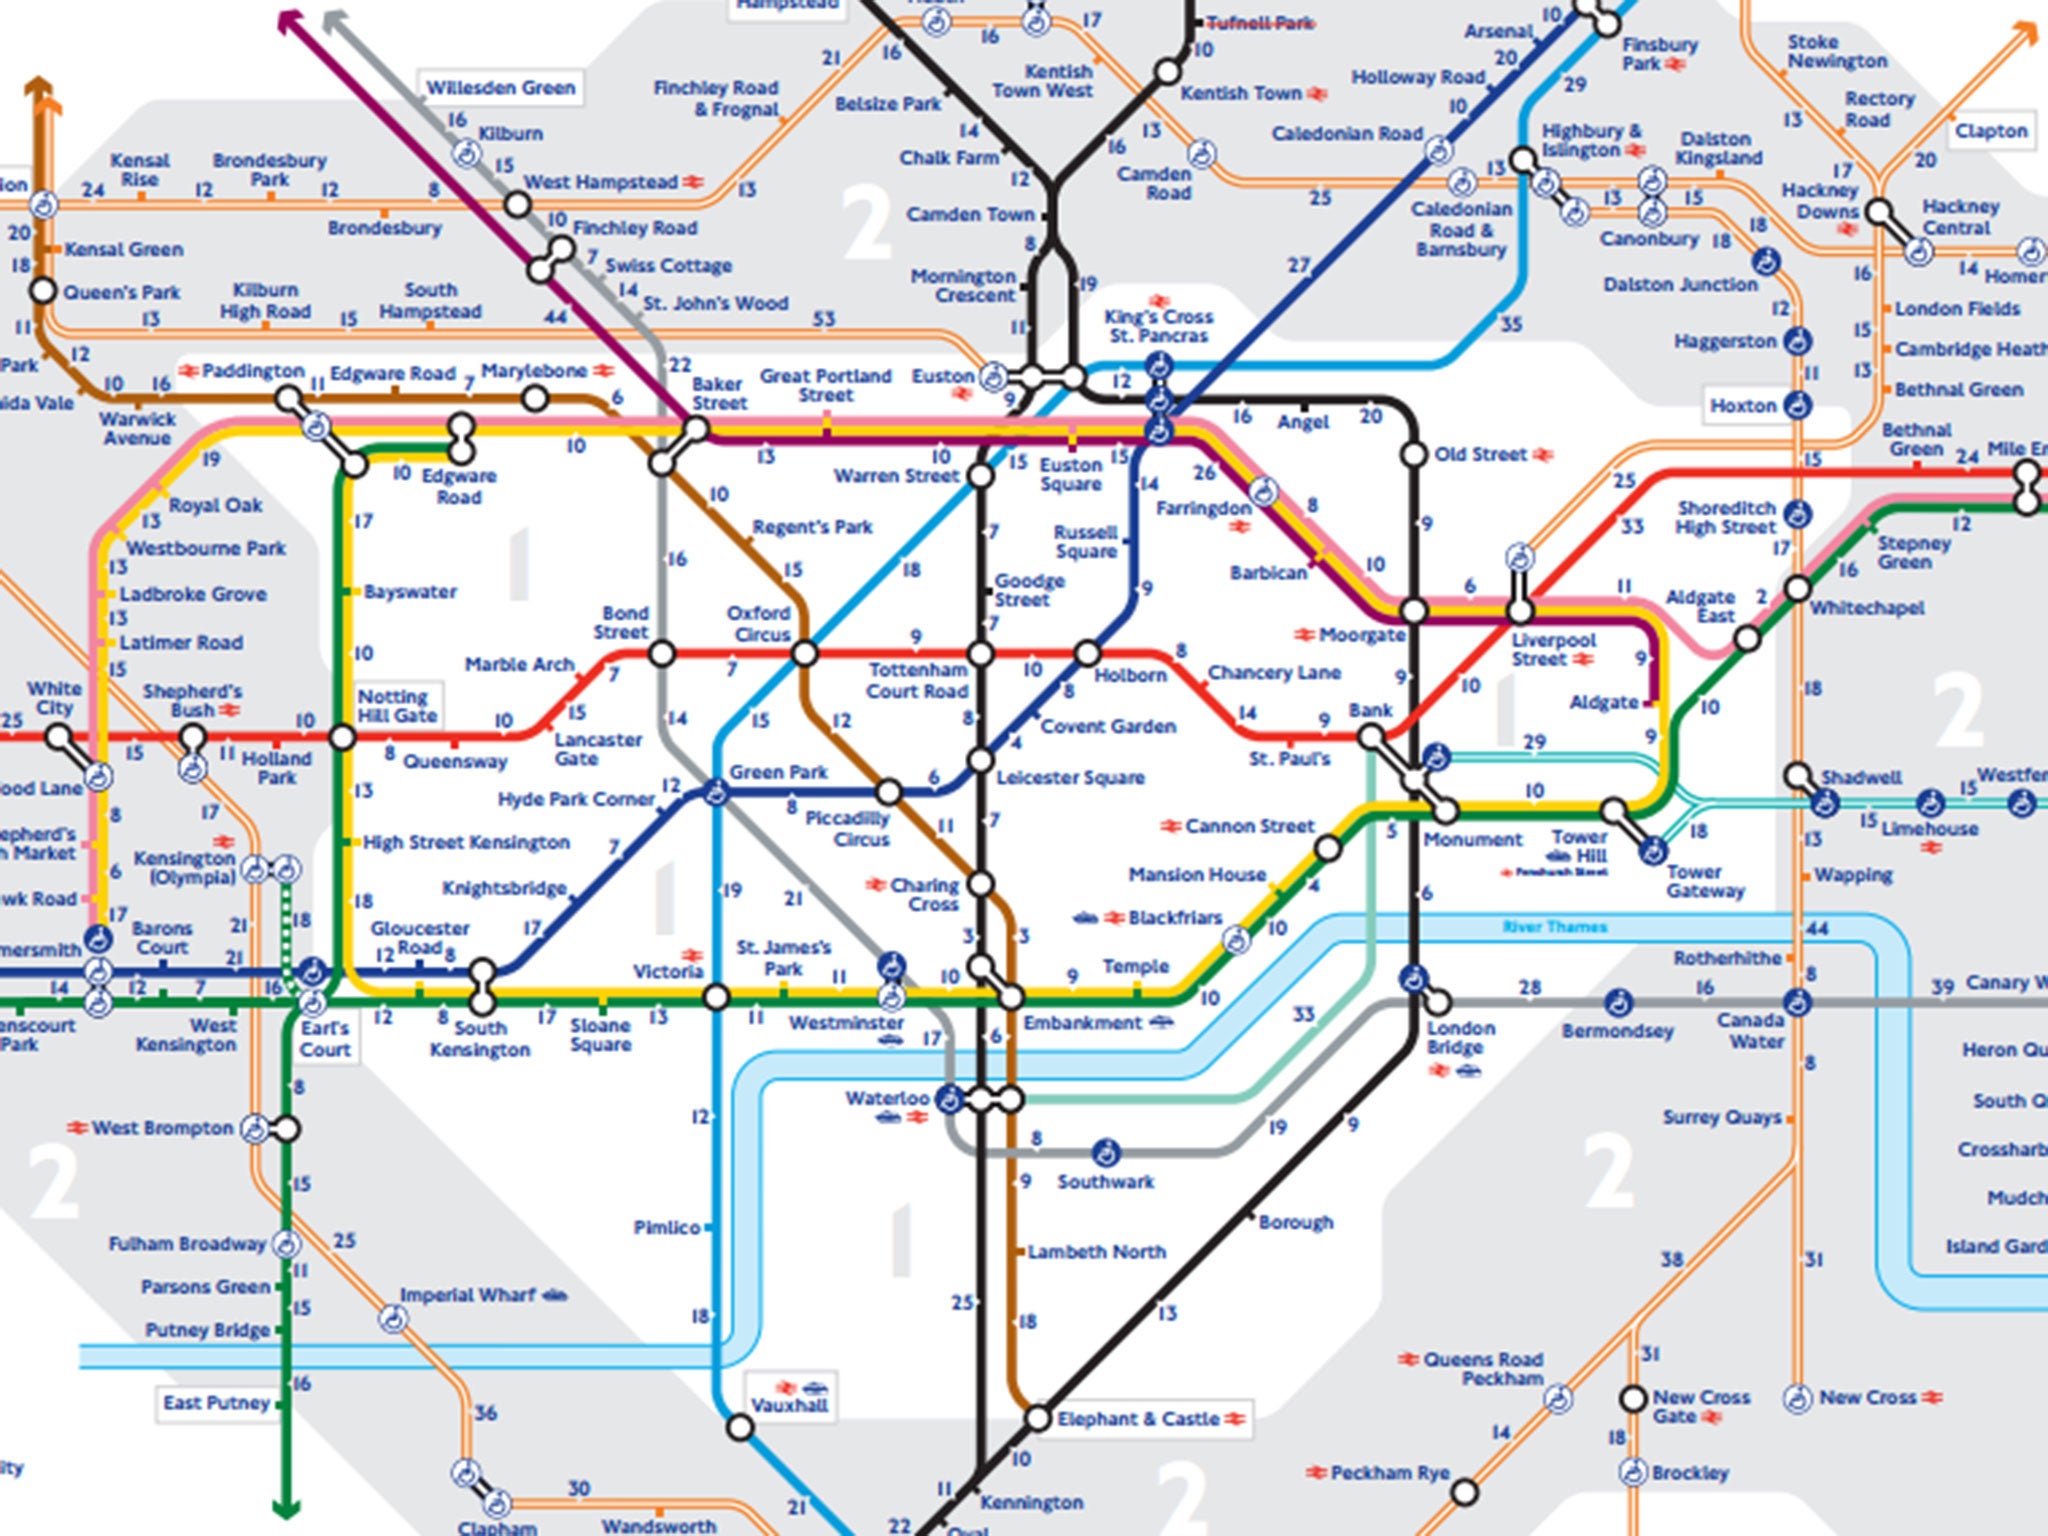 tfl-releases-first-official-walk-the-tube-map-for-london-the